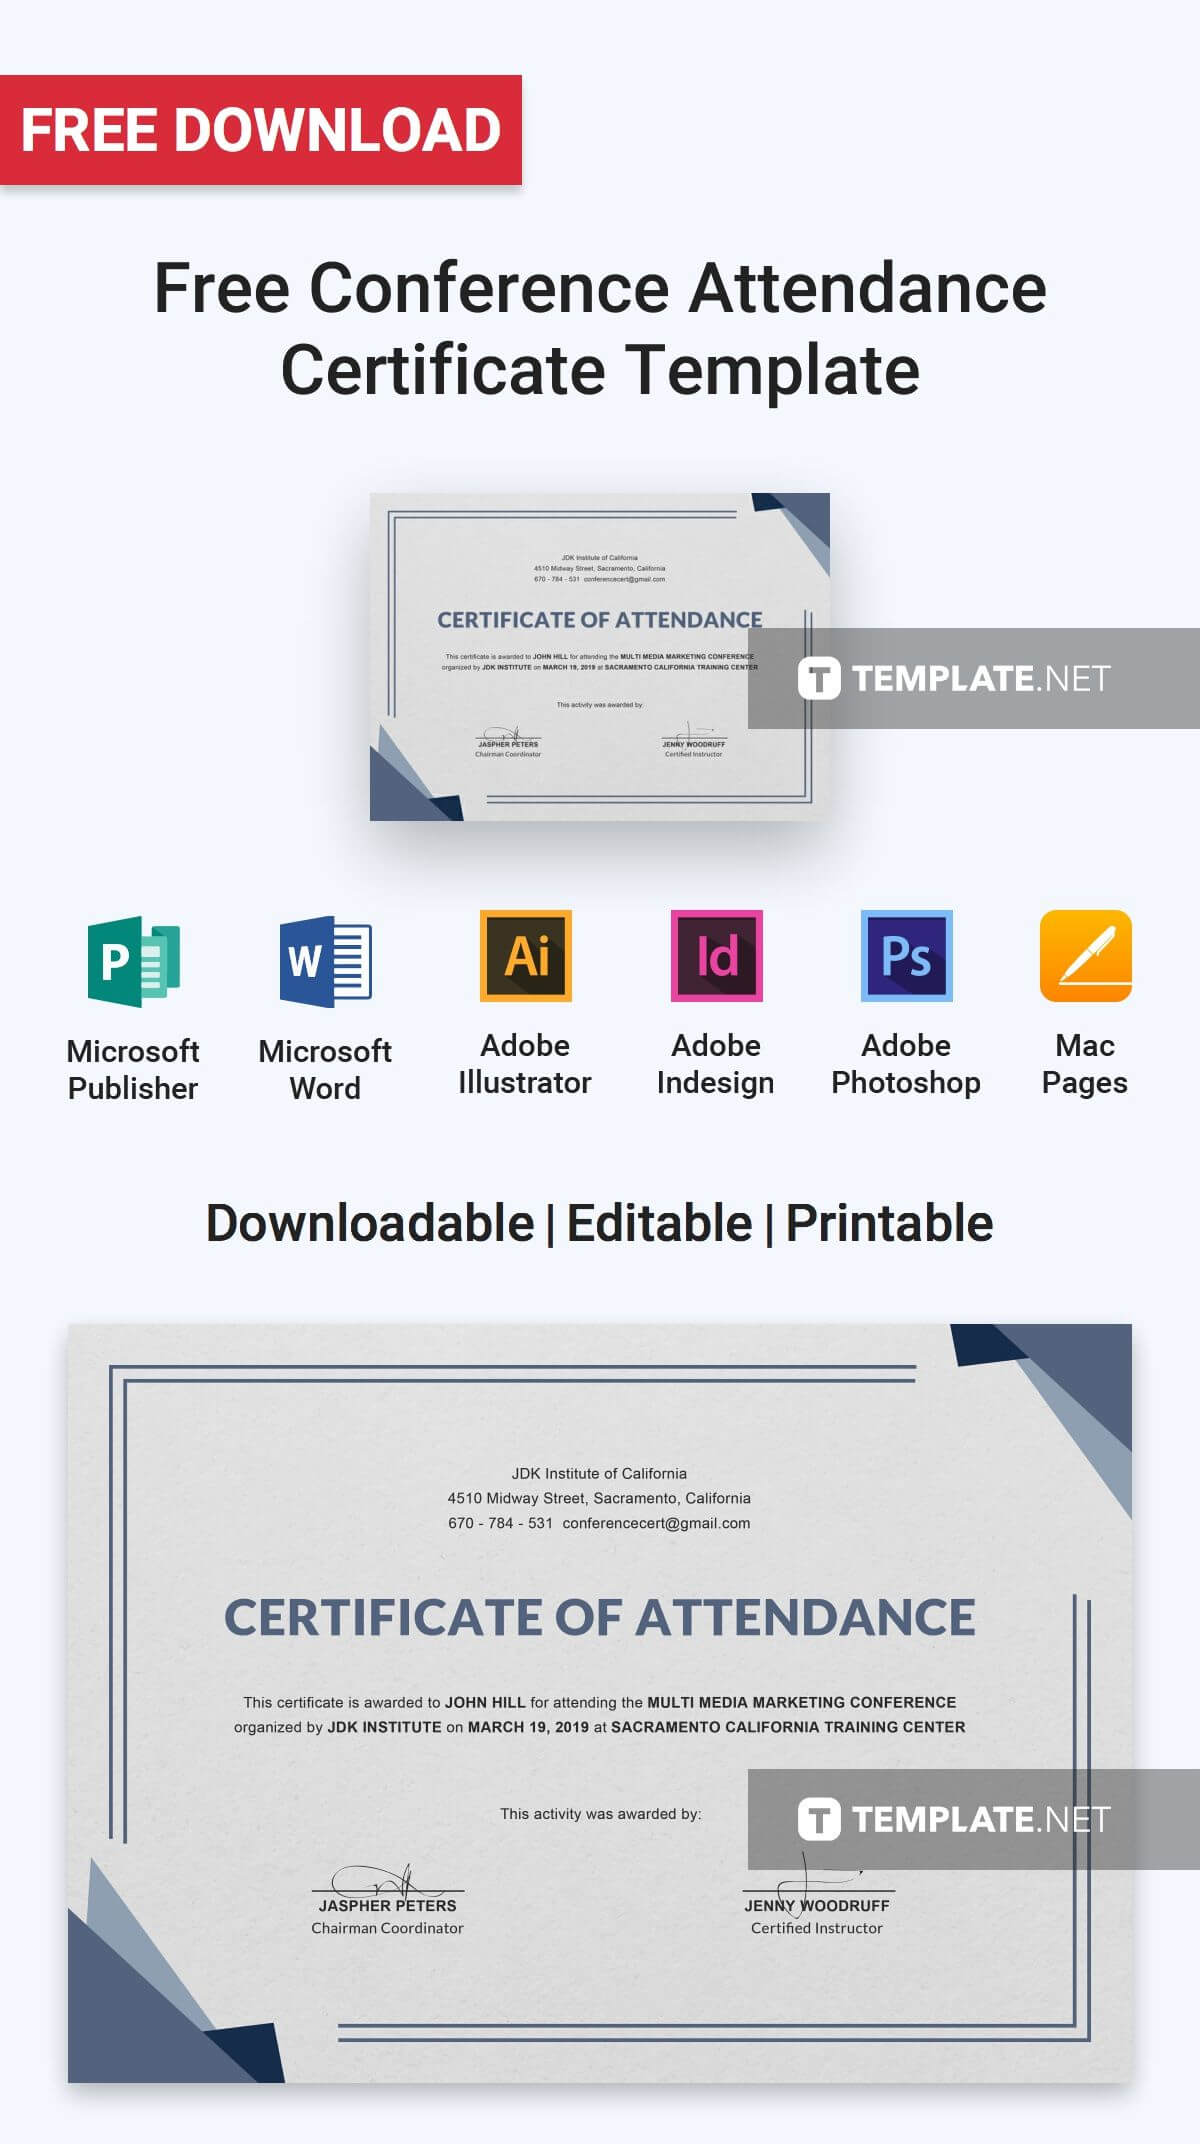 Free Conference Attendance Certificate | Certificate Intended For Certificate Of Attendance Conference Template